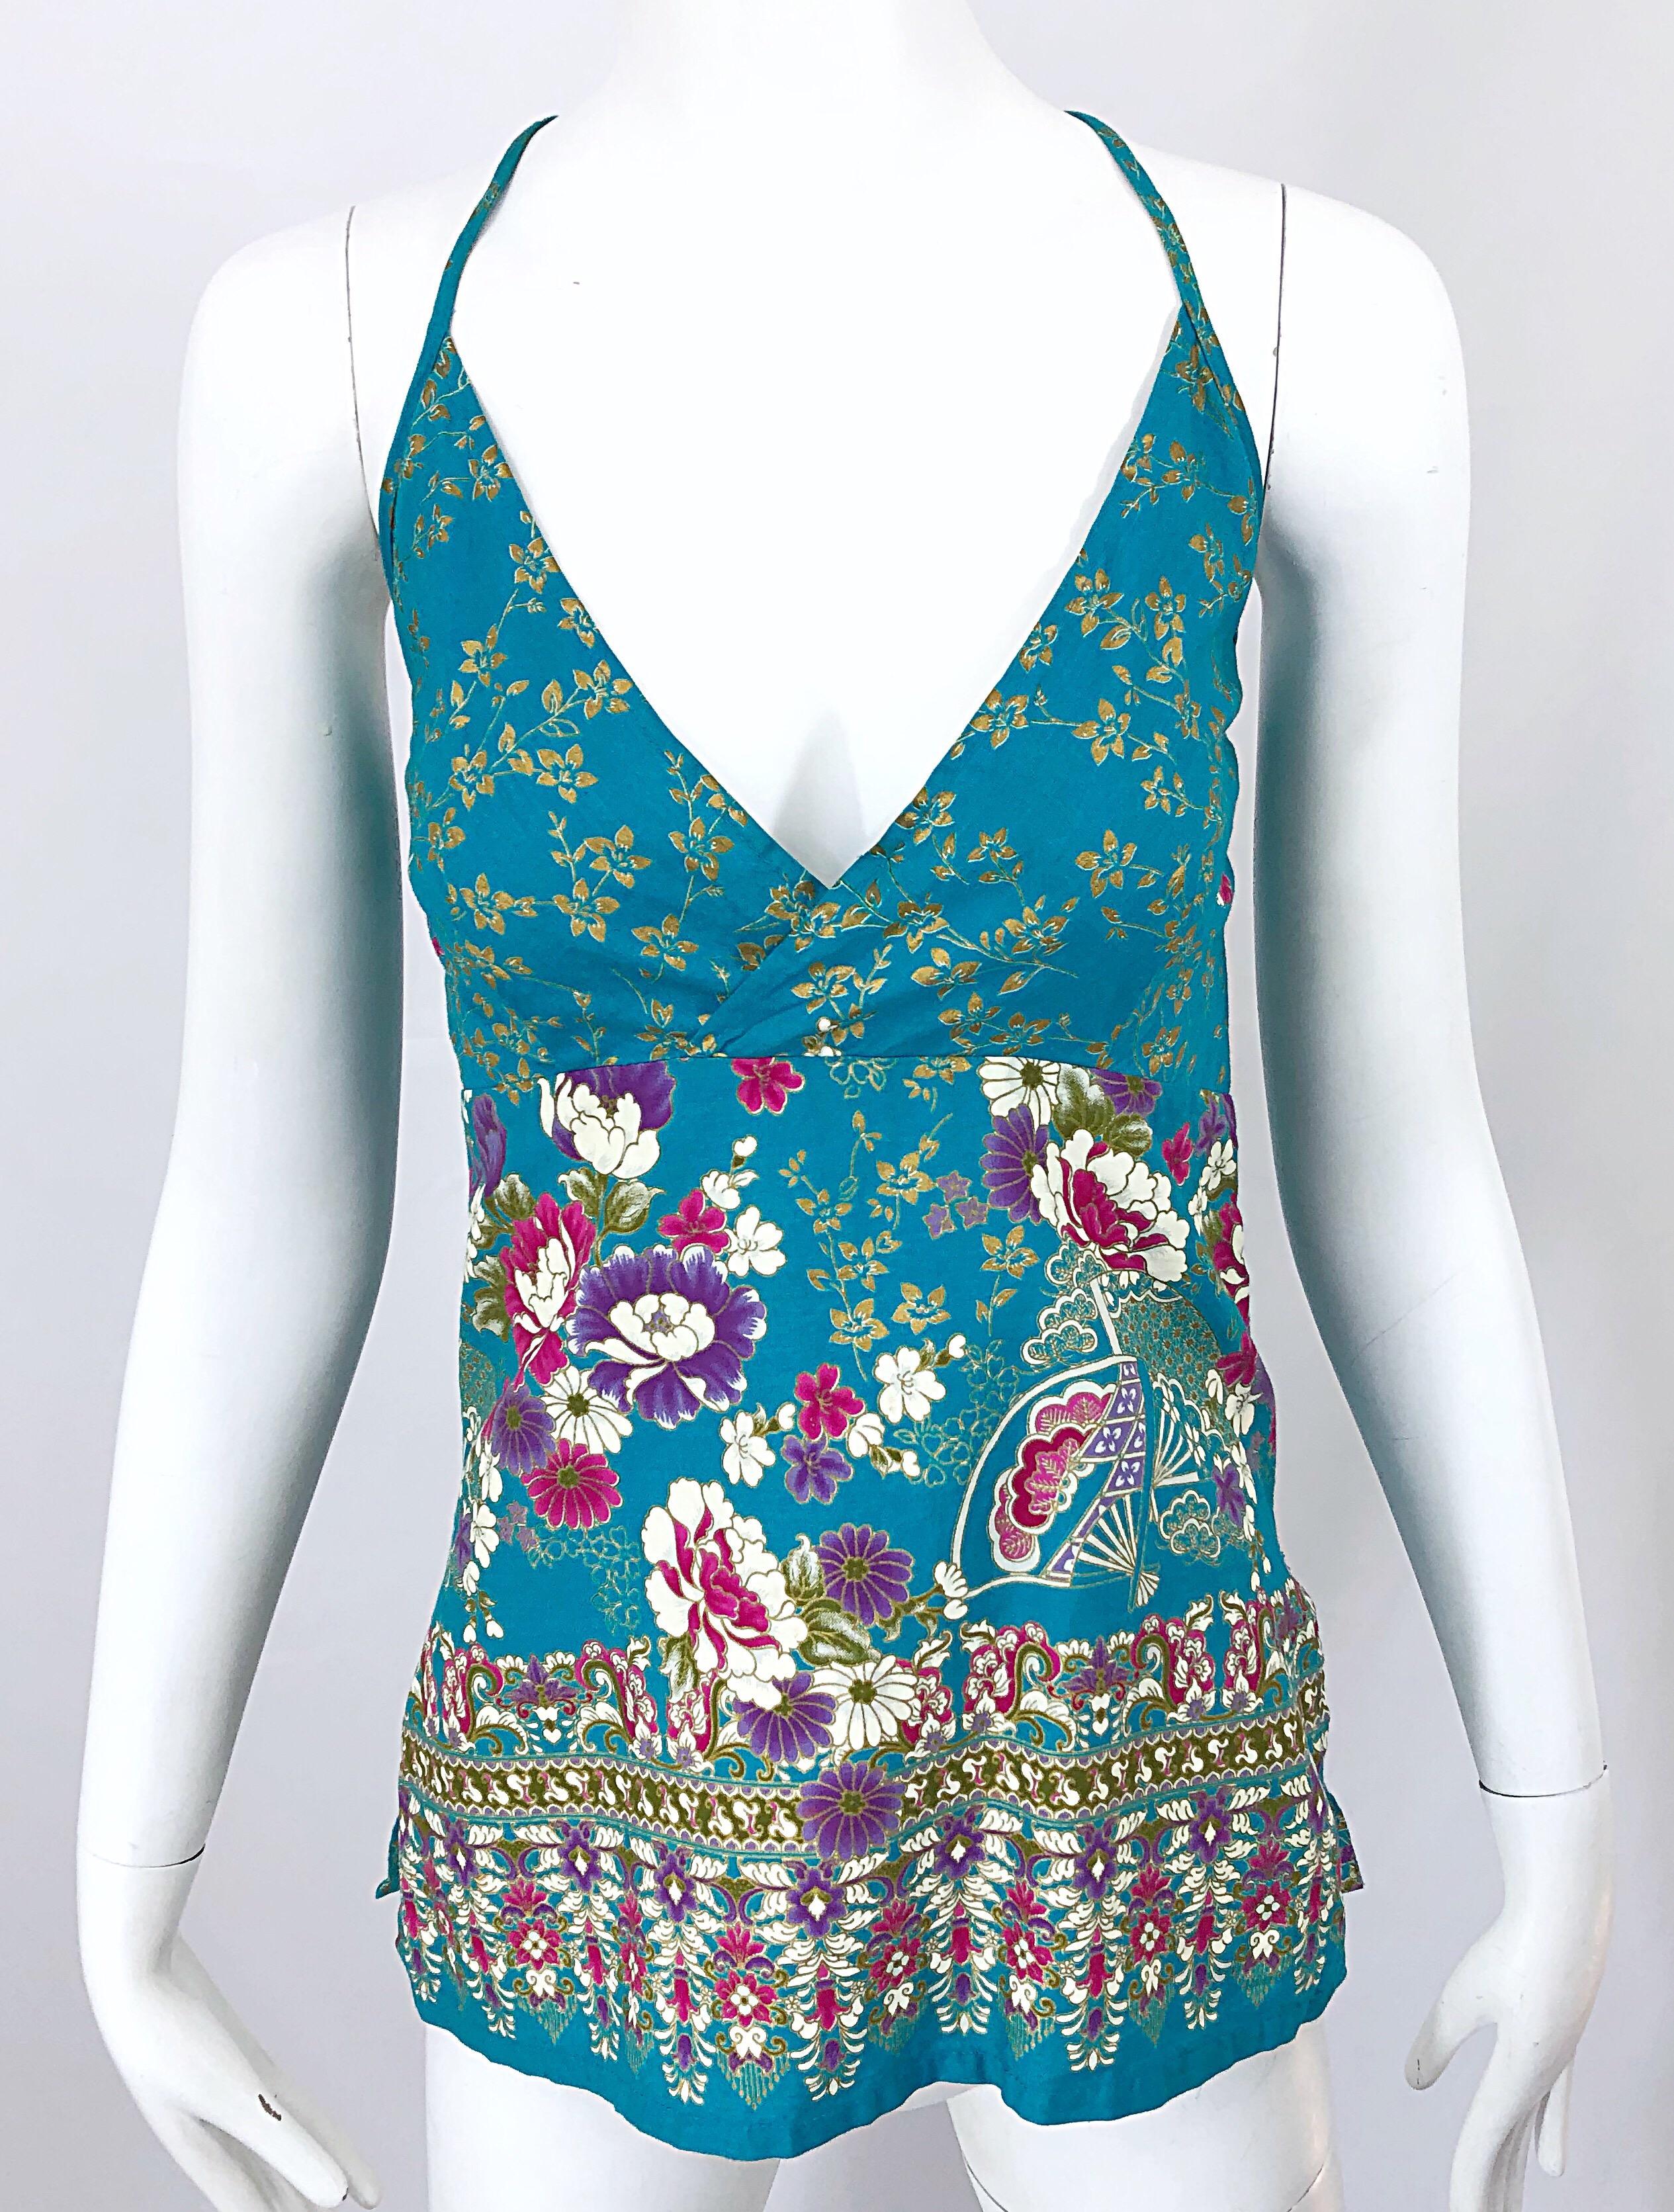 Beautiful vintage late 1970s teal / turquoise blue hand painted cotton halter top! Features a vibrant teal blue backdrop with hot pink / fuchsia, purple, green and gold leaf throughout. Criss cross halter style ties in the enter back. Hidden zipper